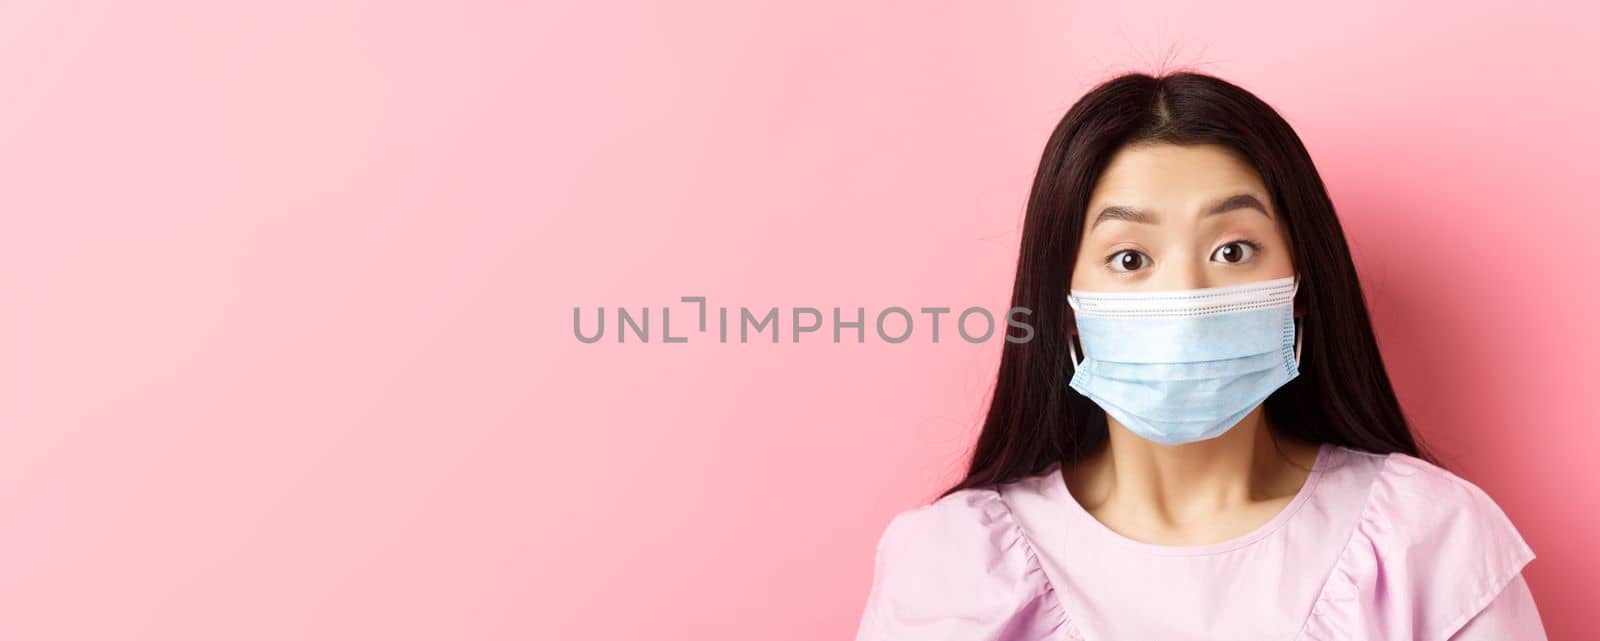 Covid-19 and healthy people concept. Close-up portrait of surprised asian girl in medical mask looking excited at camera, standing against pink background.